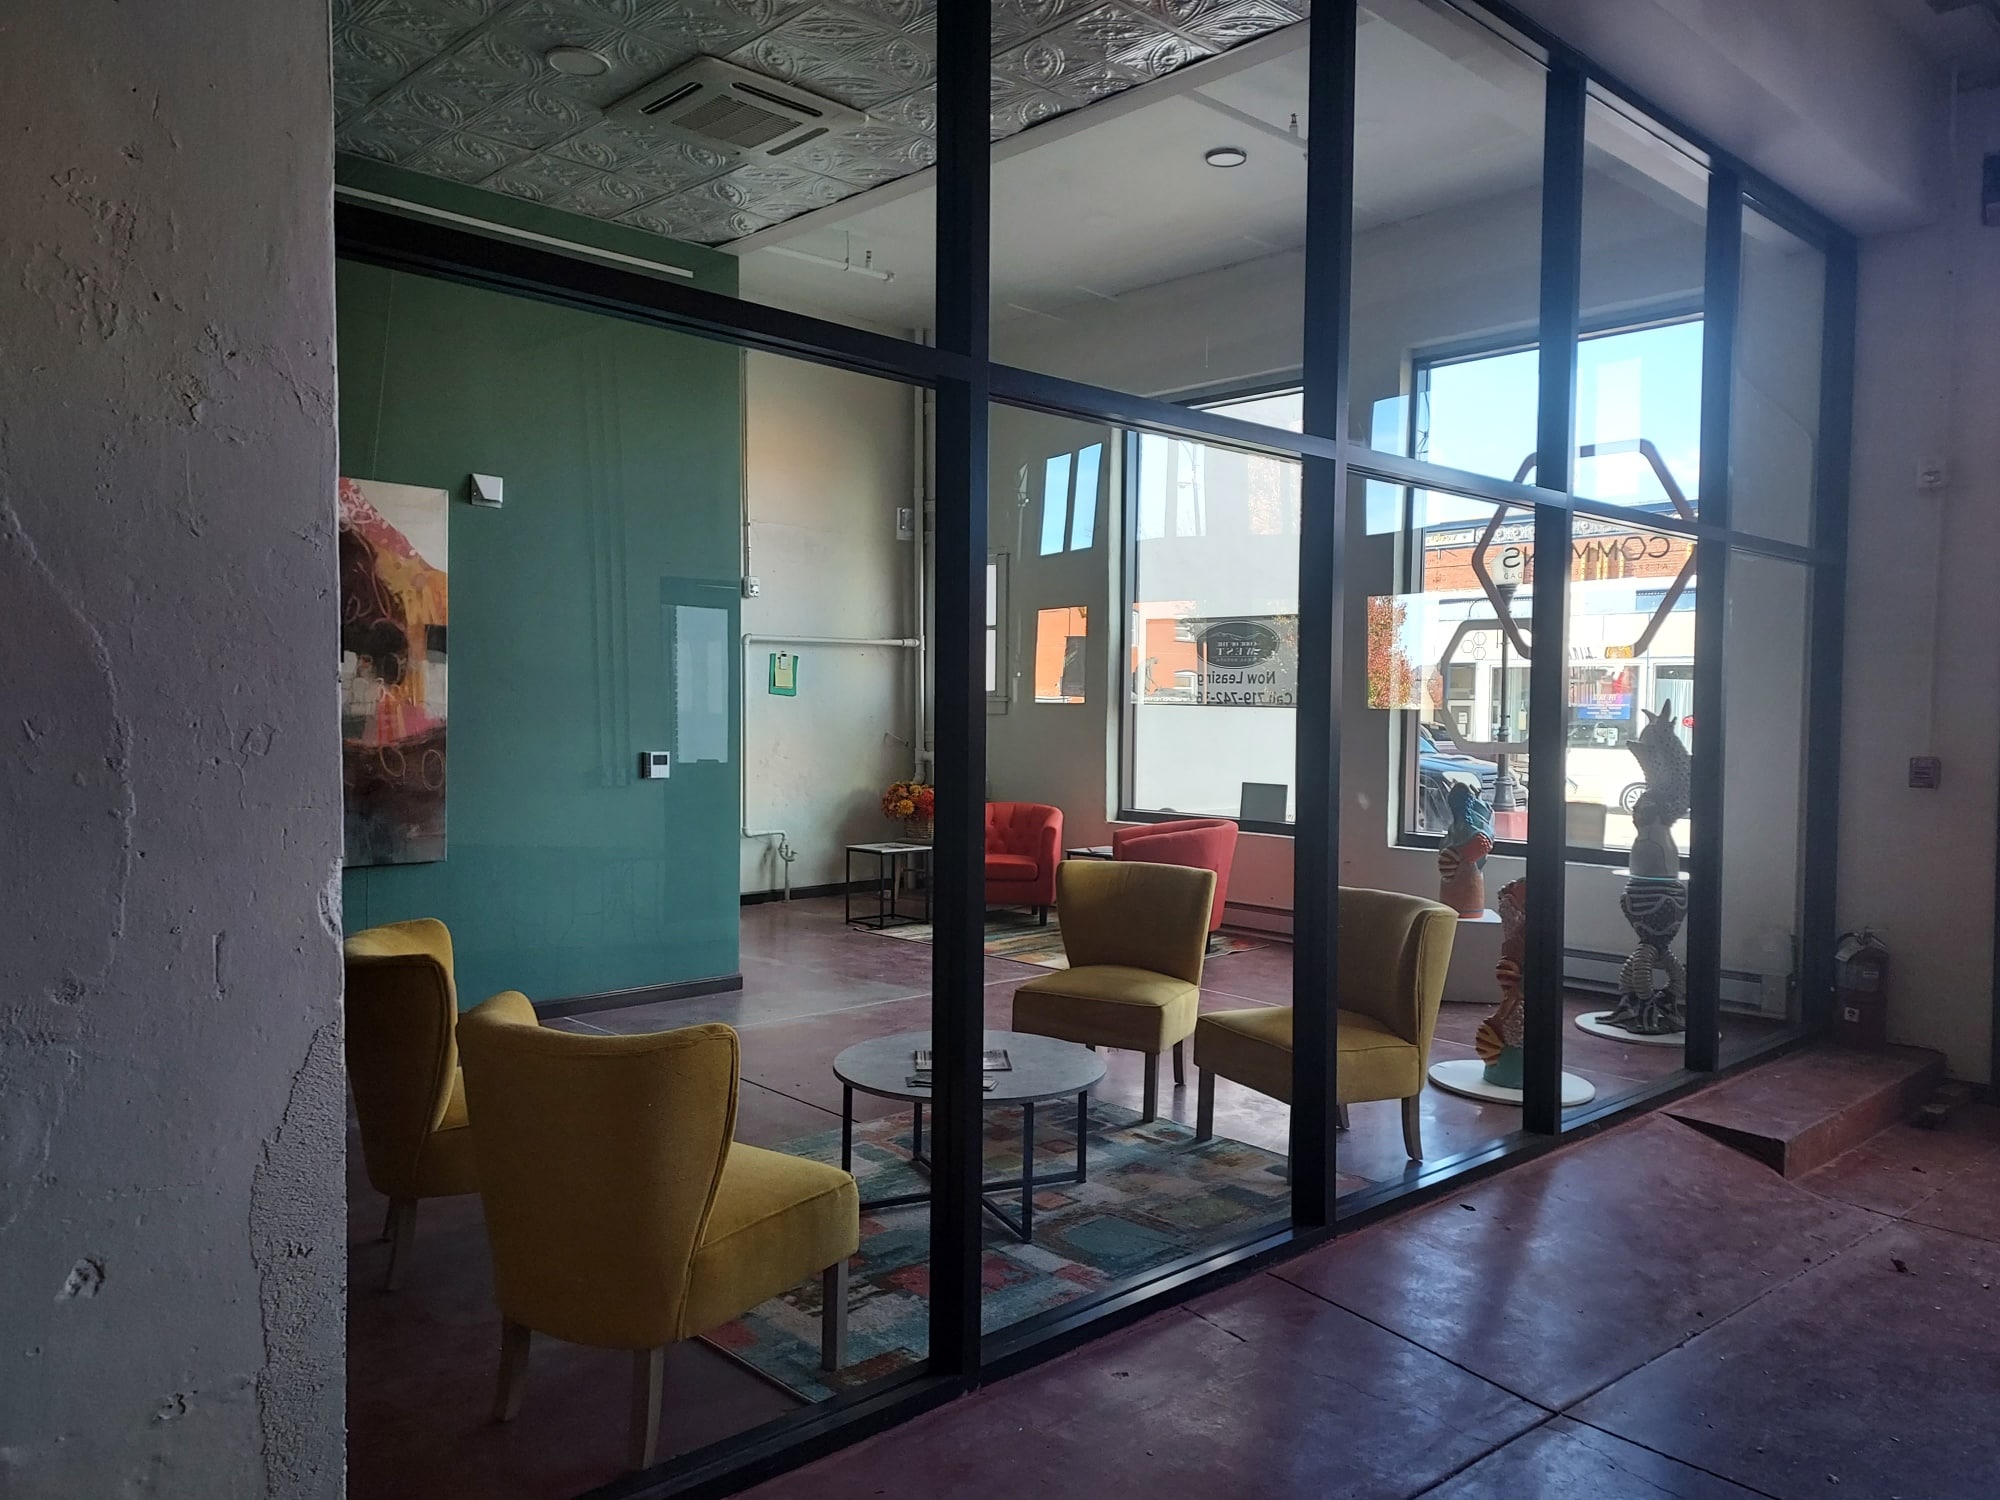 A view of a meeting space in The Commons at Space to Create. There is contemporary furniture beside large windows that look out onto Main Street.